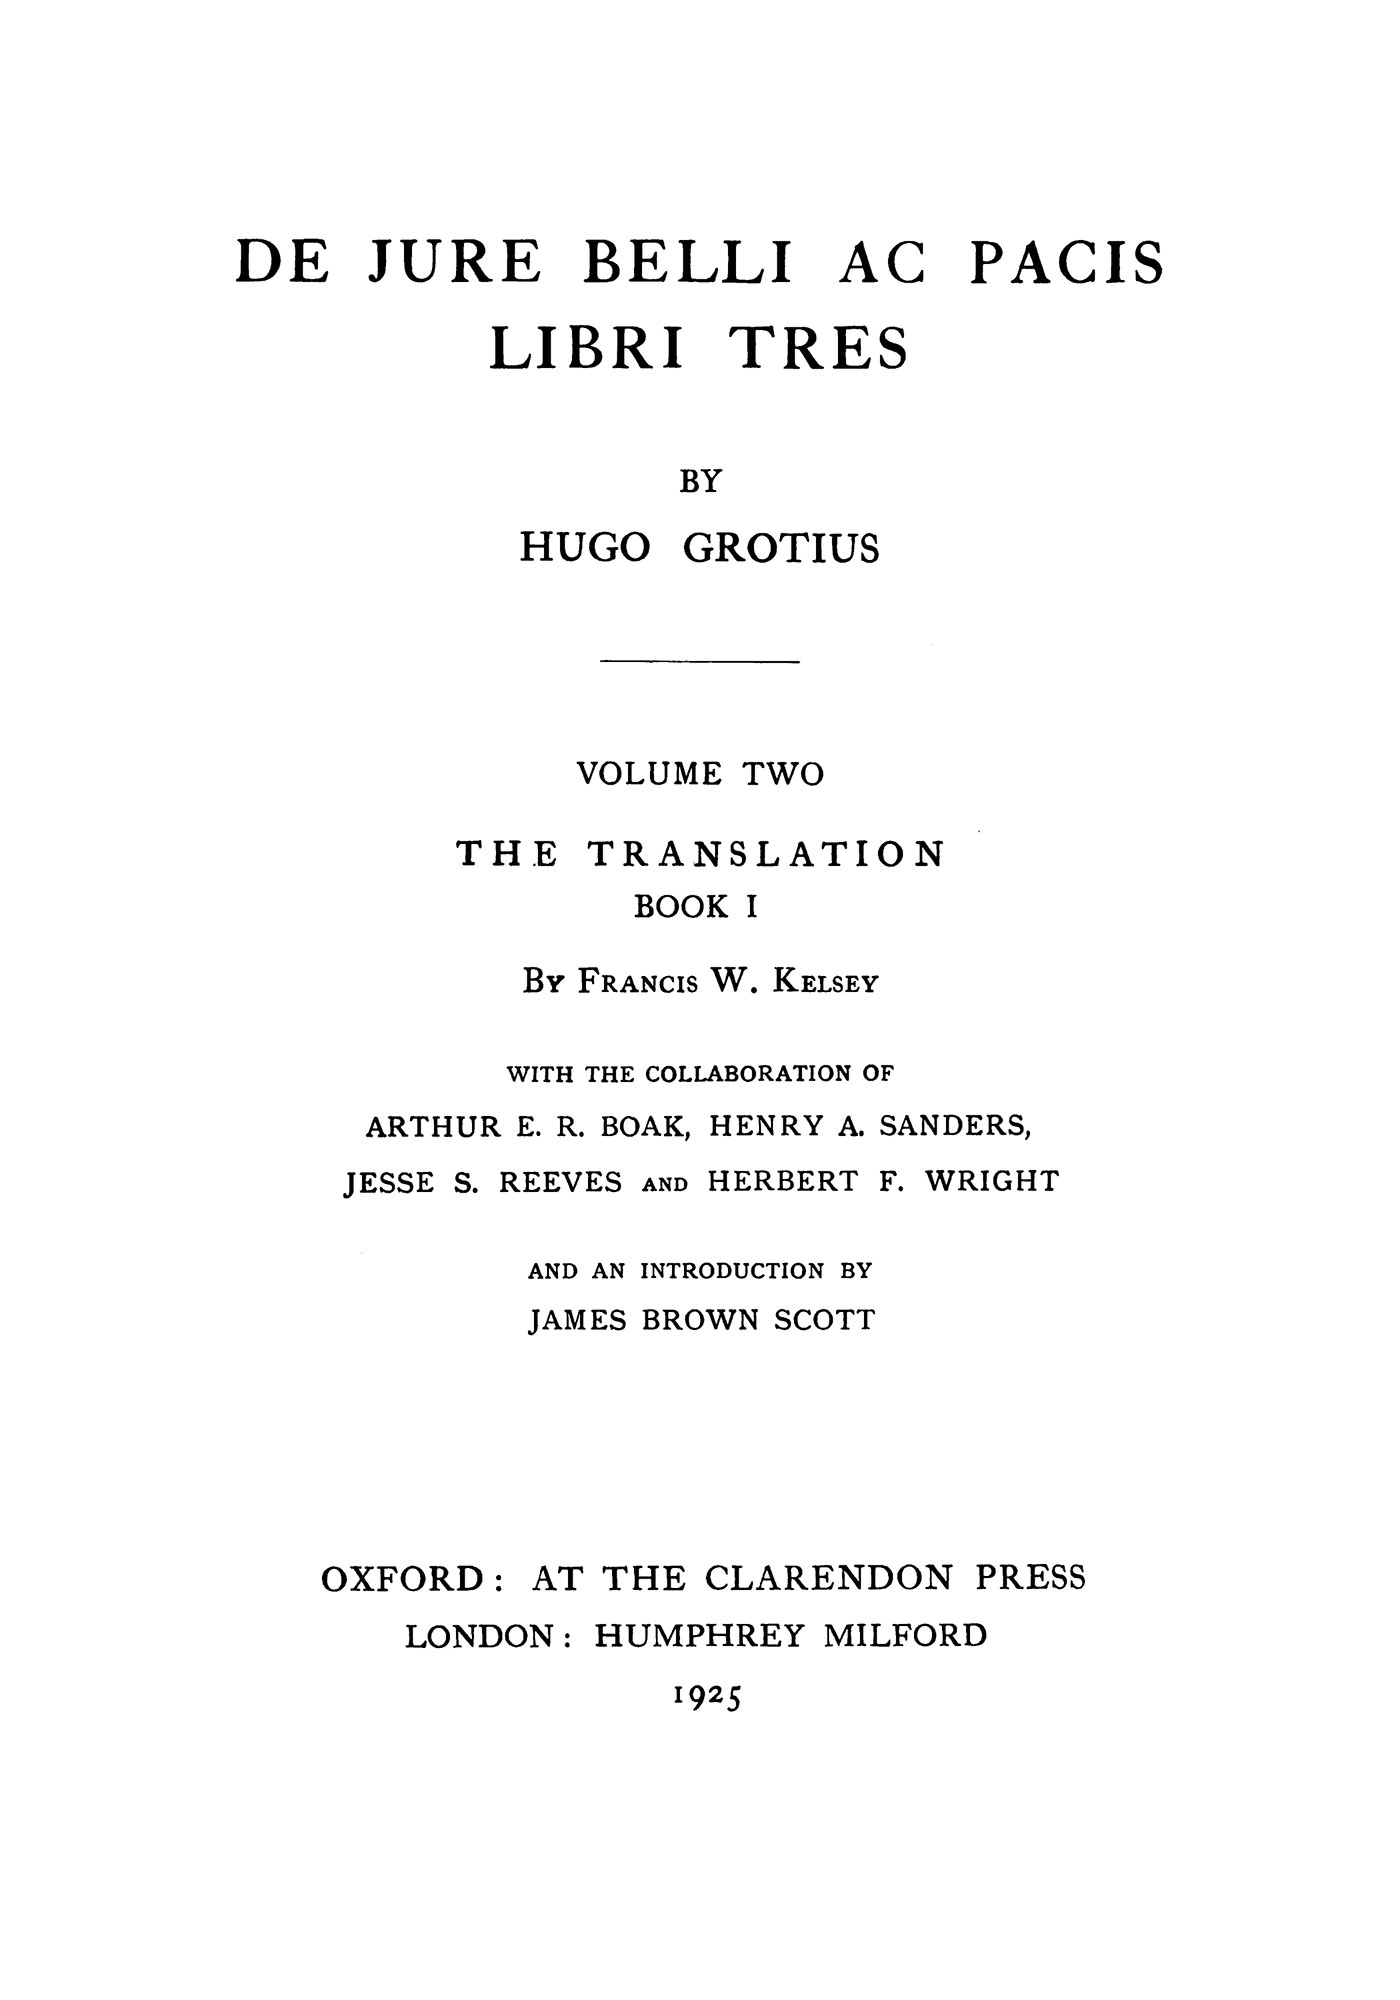 De Jure Belli ac Pacis Tres, Translated from the 1646 by Grotius, Hugo; Kelsey, Francis; W. Butler, (2021) | The Lawbook Exchange, Ltd., ABAA ILAB